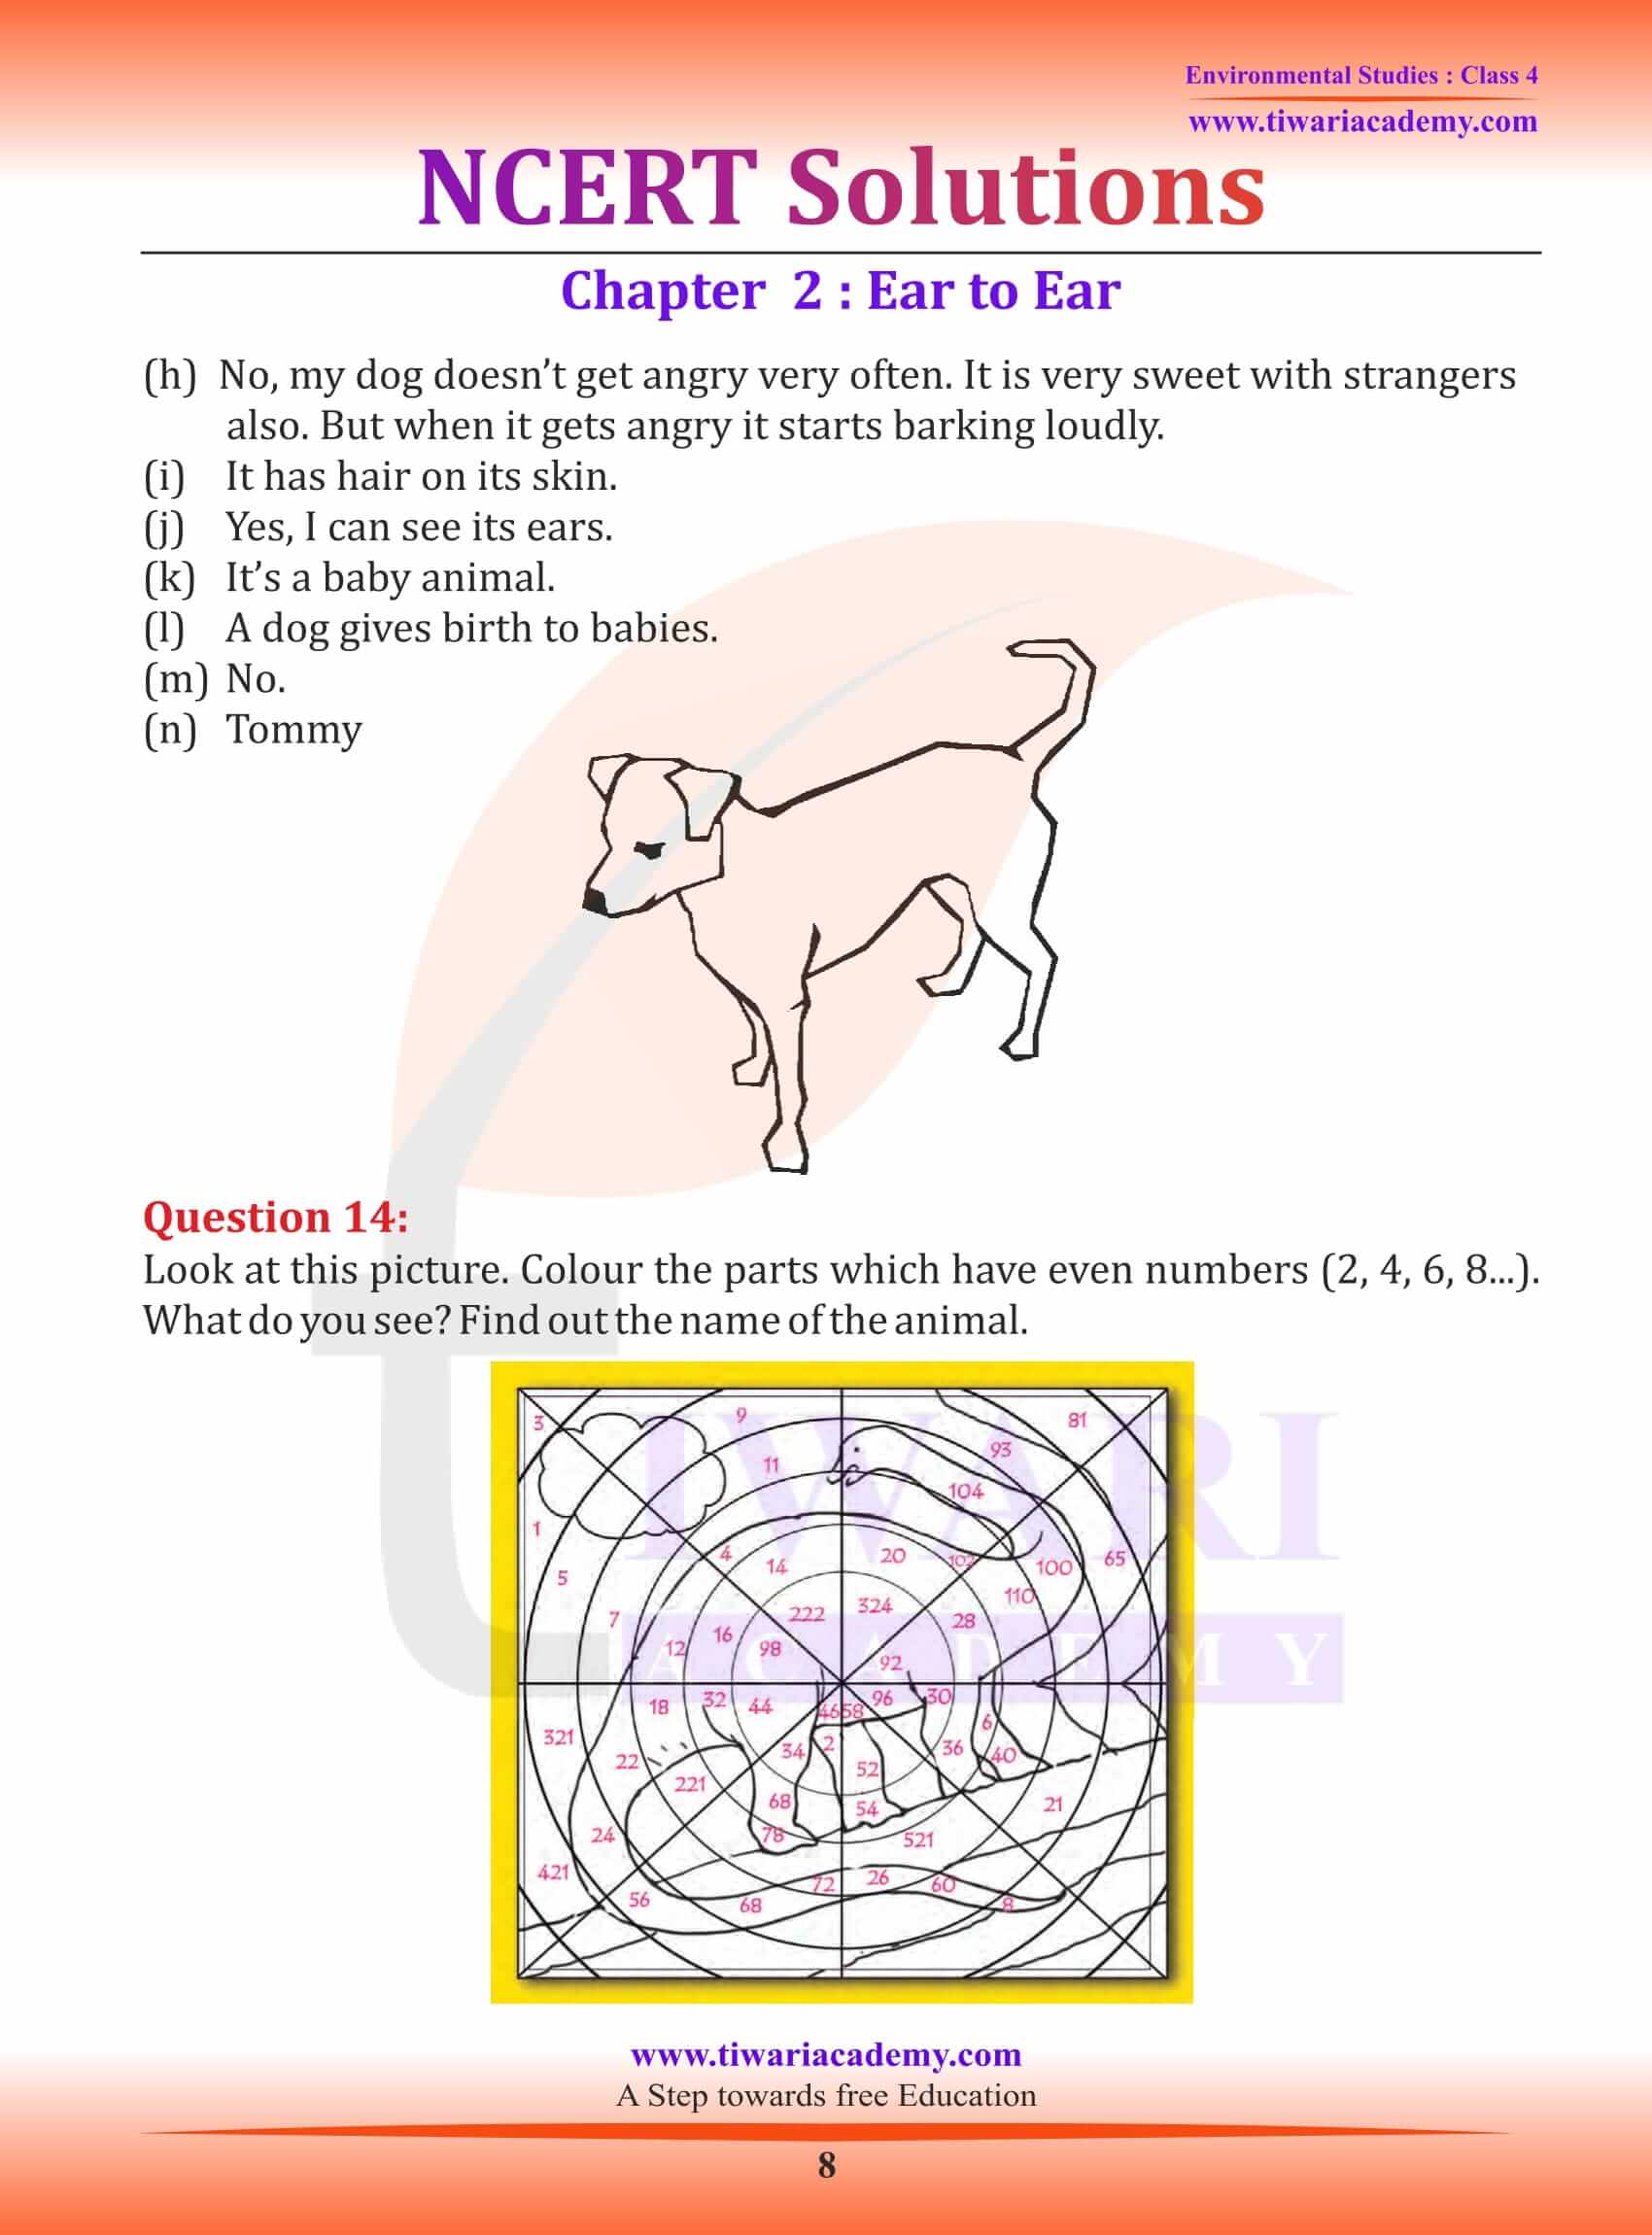 NCERT Solutions for Class 4 EVS Chapter 2 textbook answers